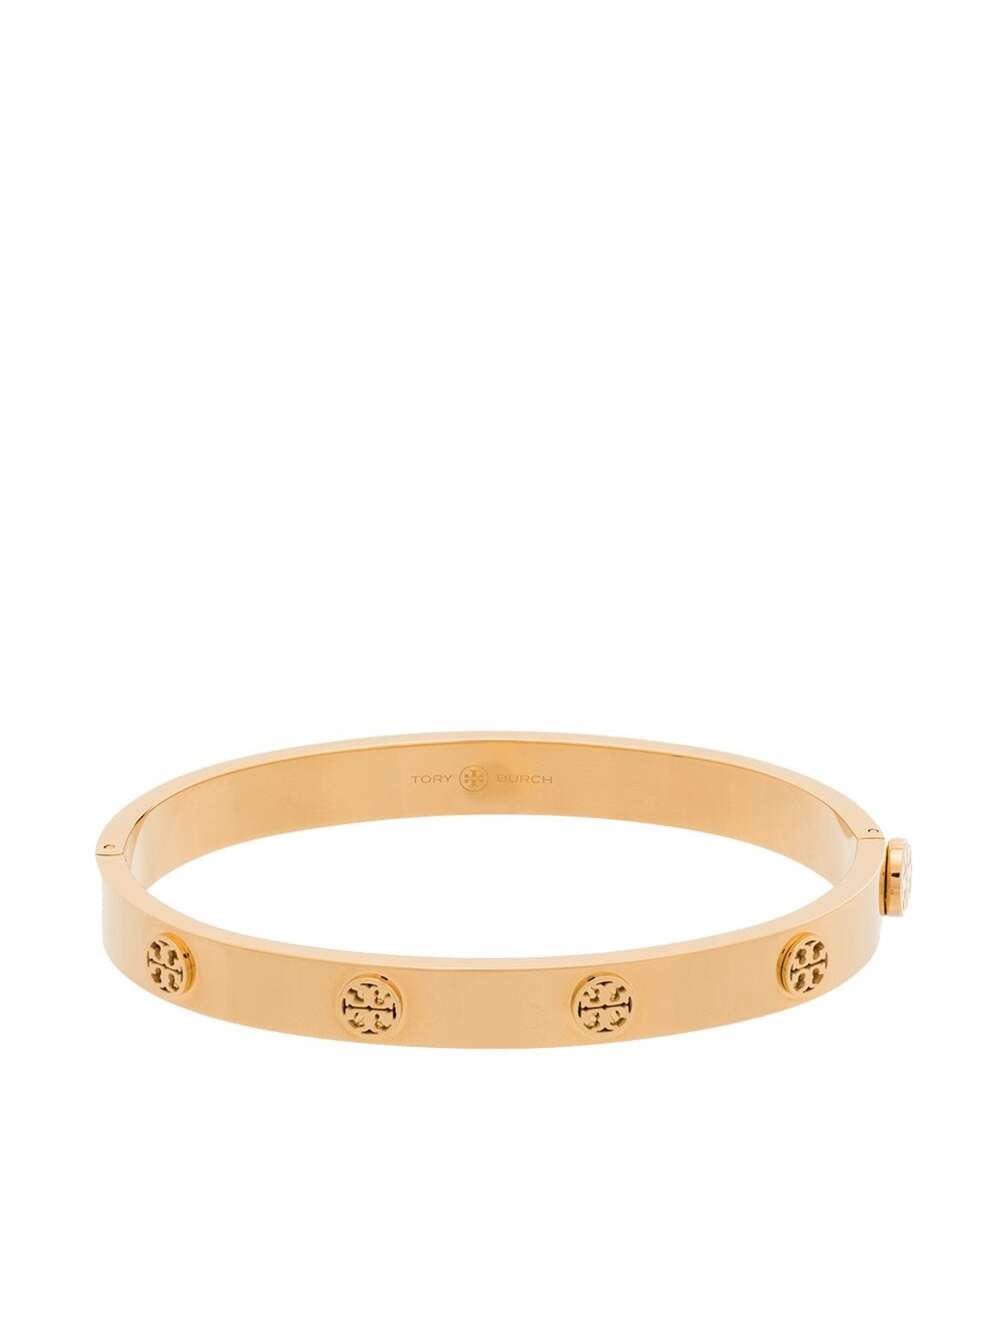 Tory Burch Gold-colored Steel Bracelet With Logo